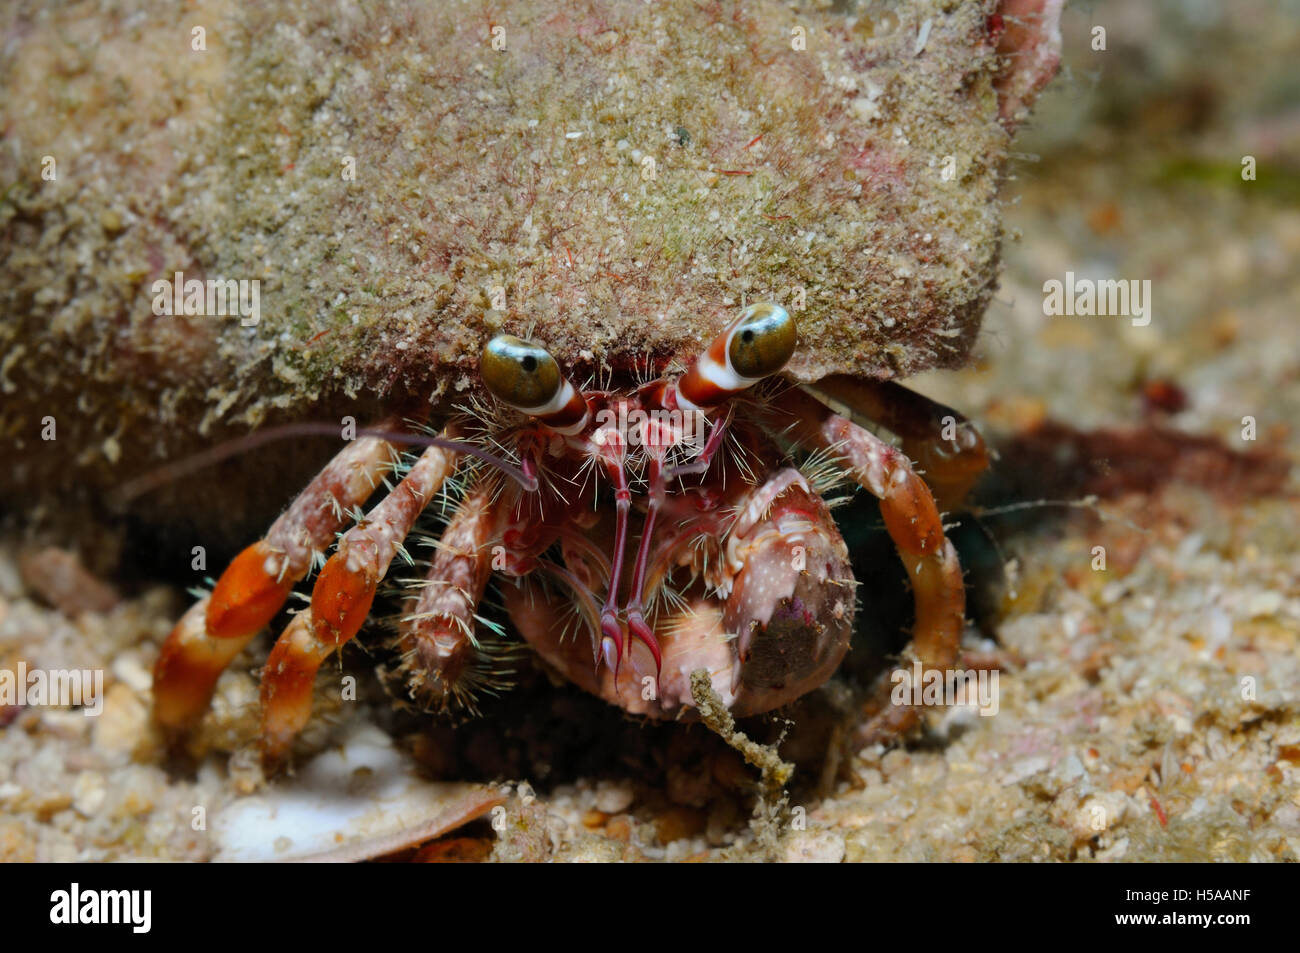 Anemone hermit crab laden with a big shell covered with small bits of debris for camouflage, Puerto Galera, Philippines Stock Photo